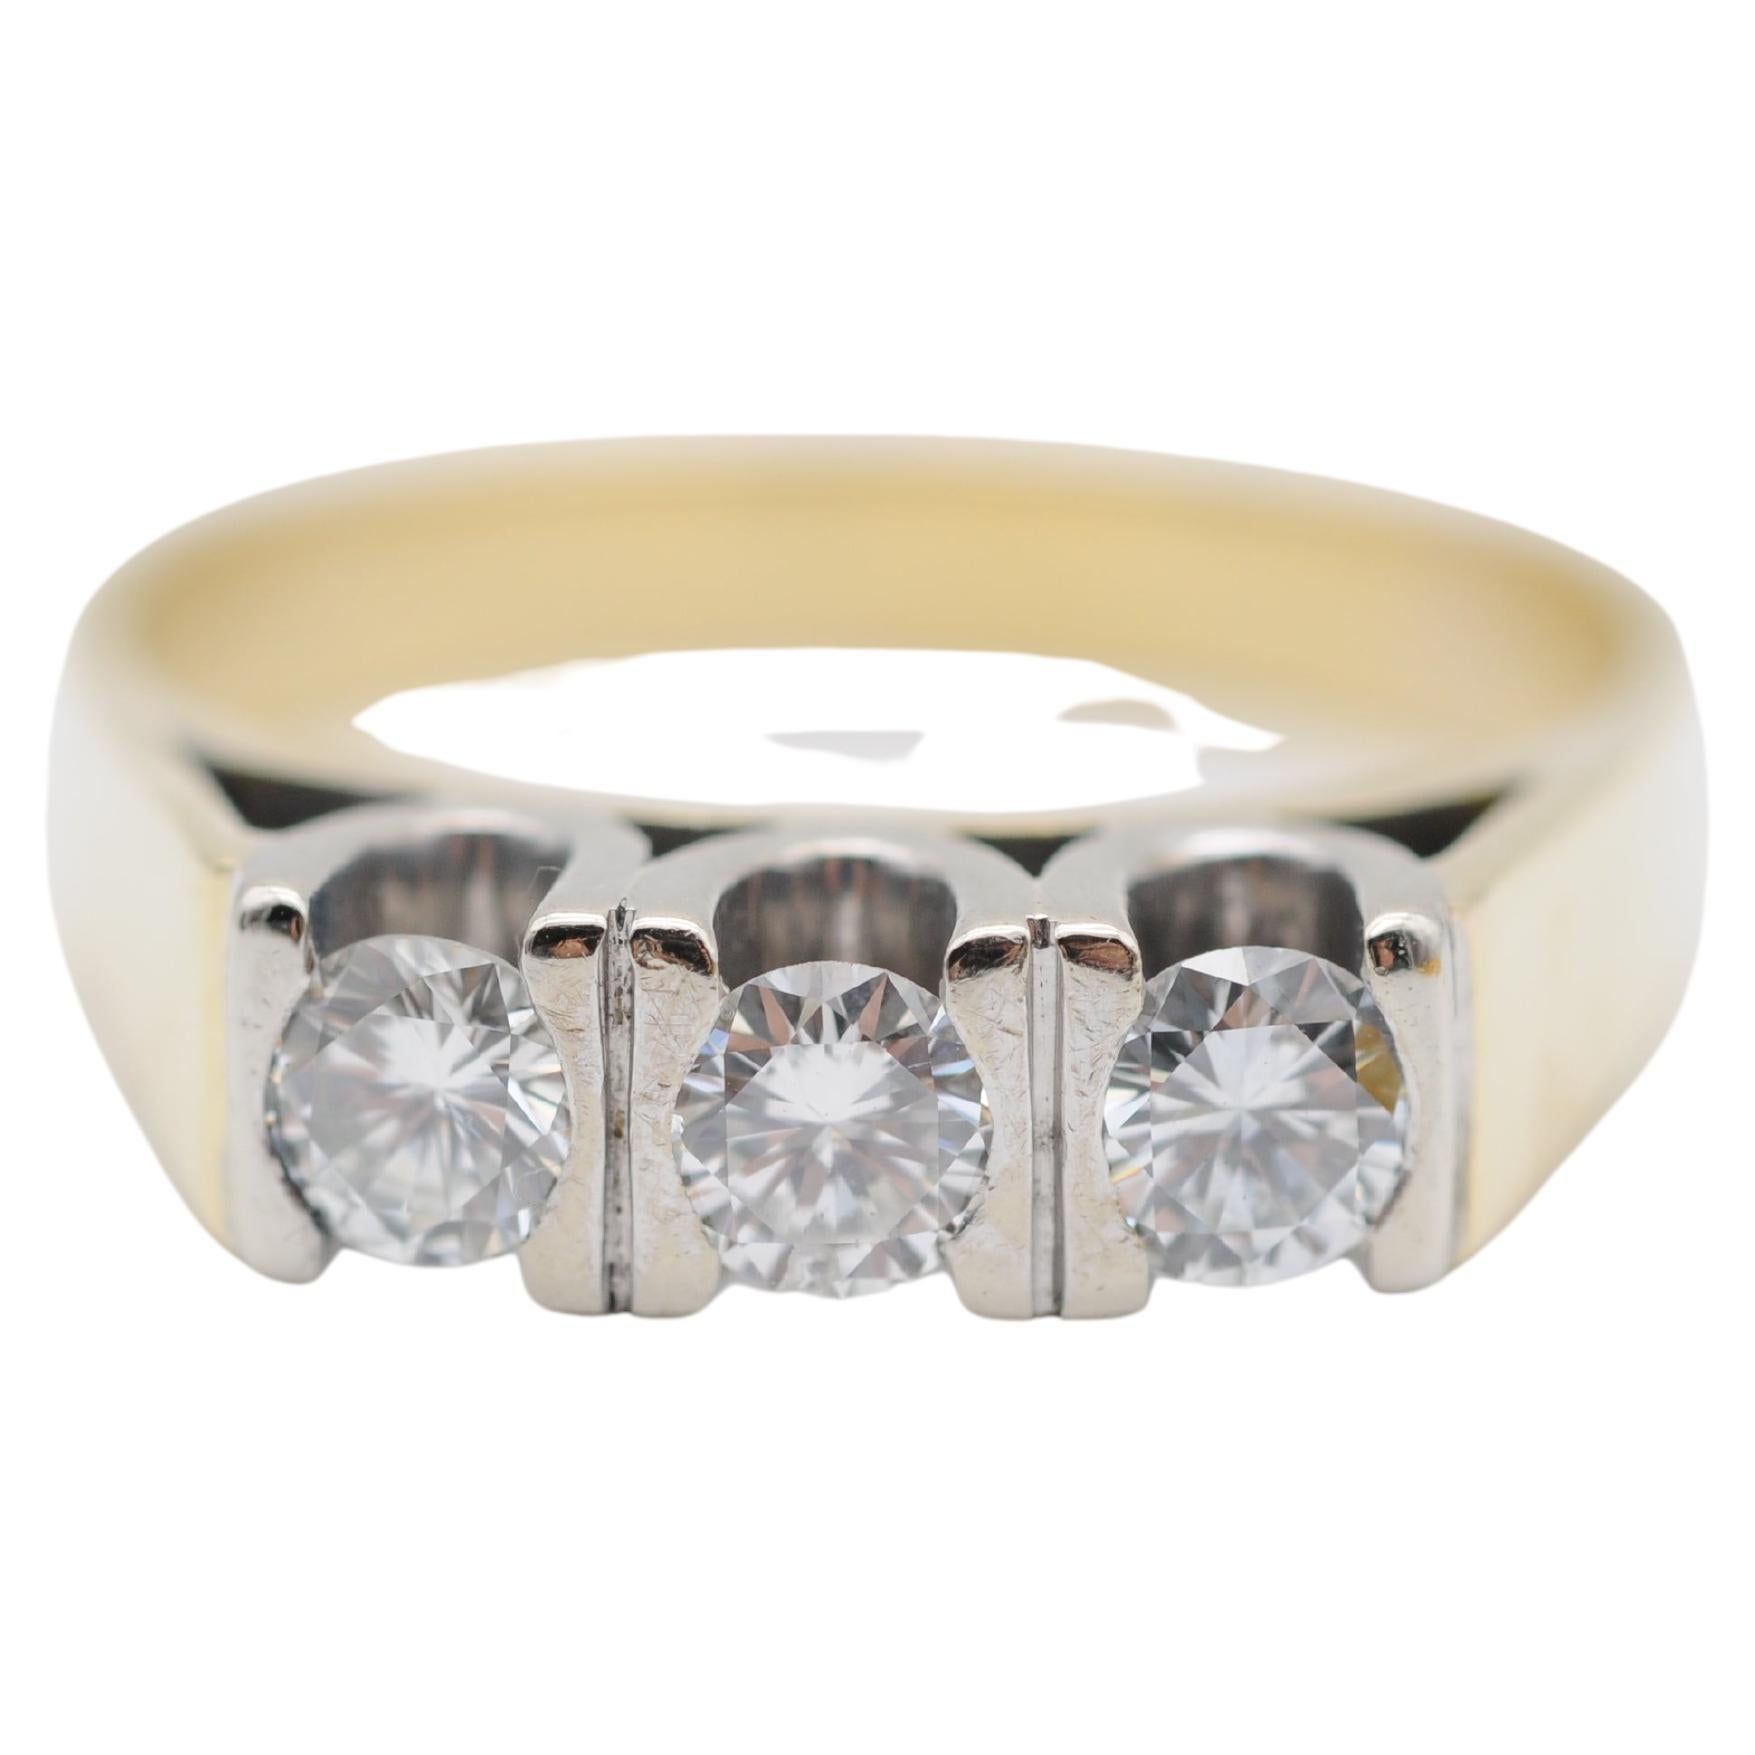 14k Gold Diamond Band Ring of 0.60 Carat For Sale